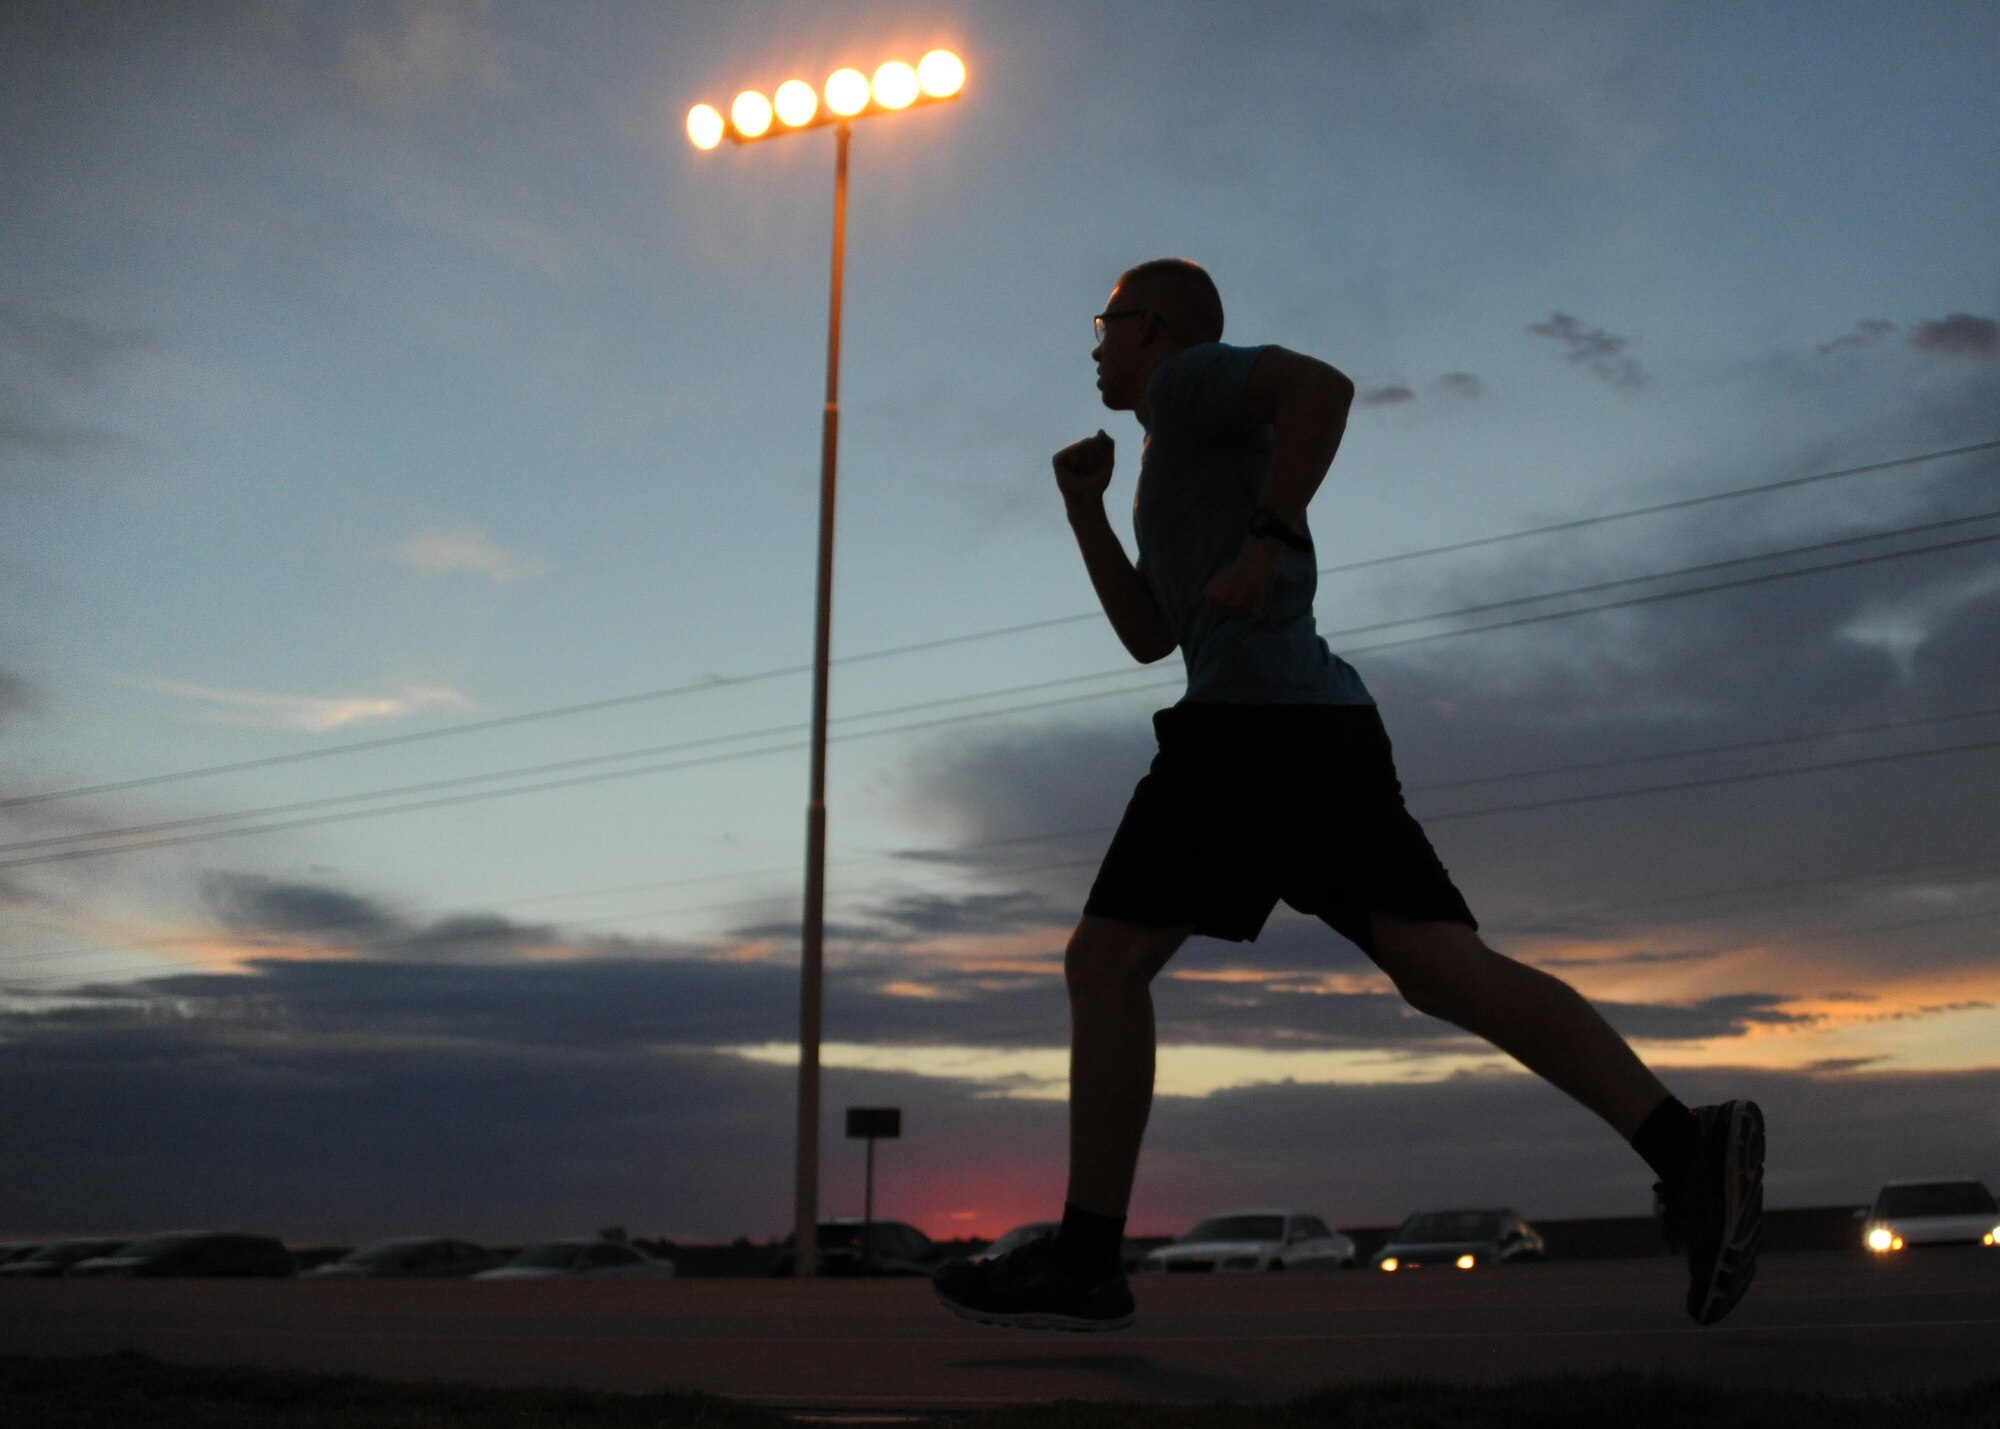 An Airmen assigned to the 56th Fighter Wing participates in a 1.5 mile run at Luke Air Force Base, Ariz., July 10, 2017. The run clinic is held at the base track every Monday, Wednesday and Friday at 5 a.m. and includes different segments of running, sit-ups and pushups. (U.S. Air Force photo/Airman 1st Class Caleb Worpel)